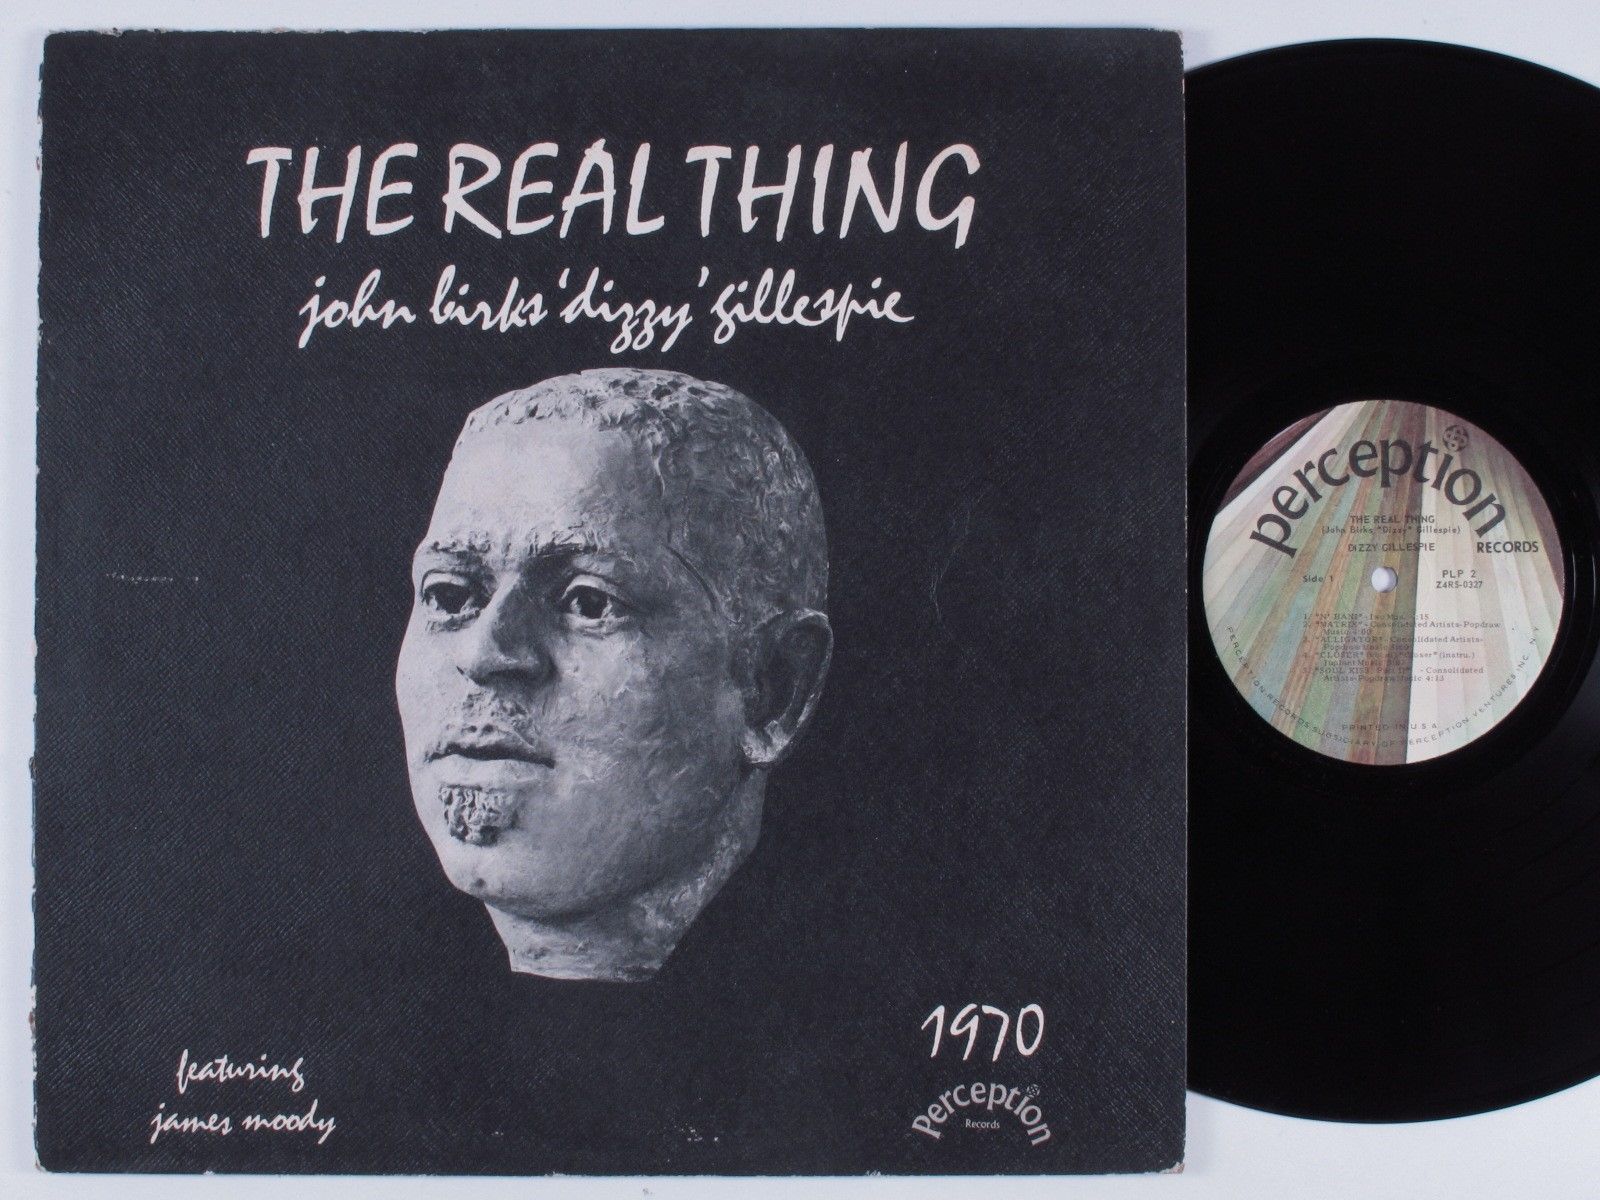 DIZZY GILLESPIE The Real Thing PERCEPTION LP VG+